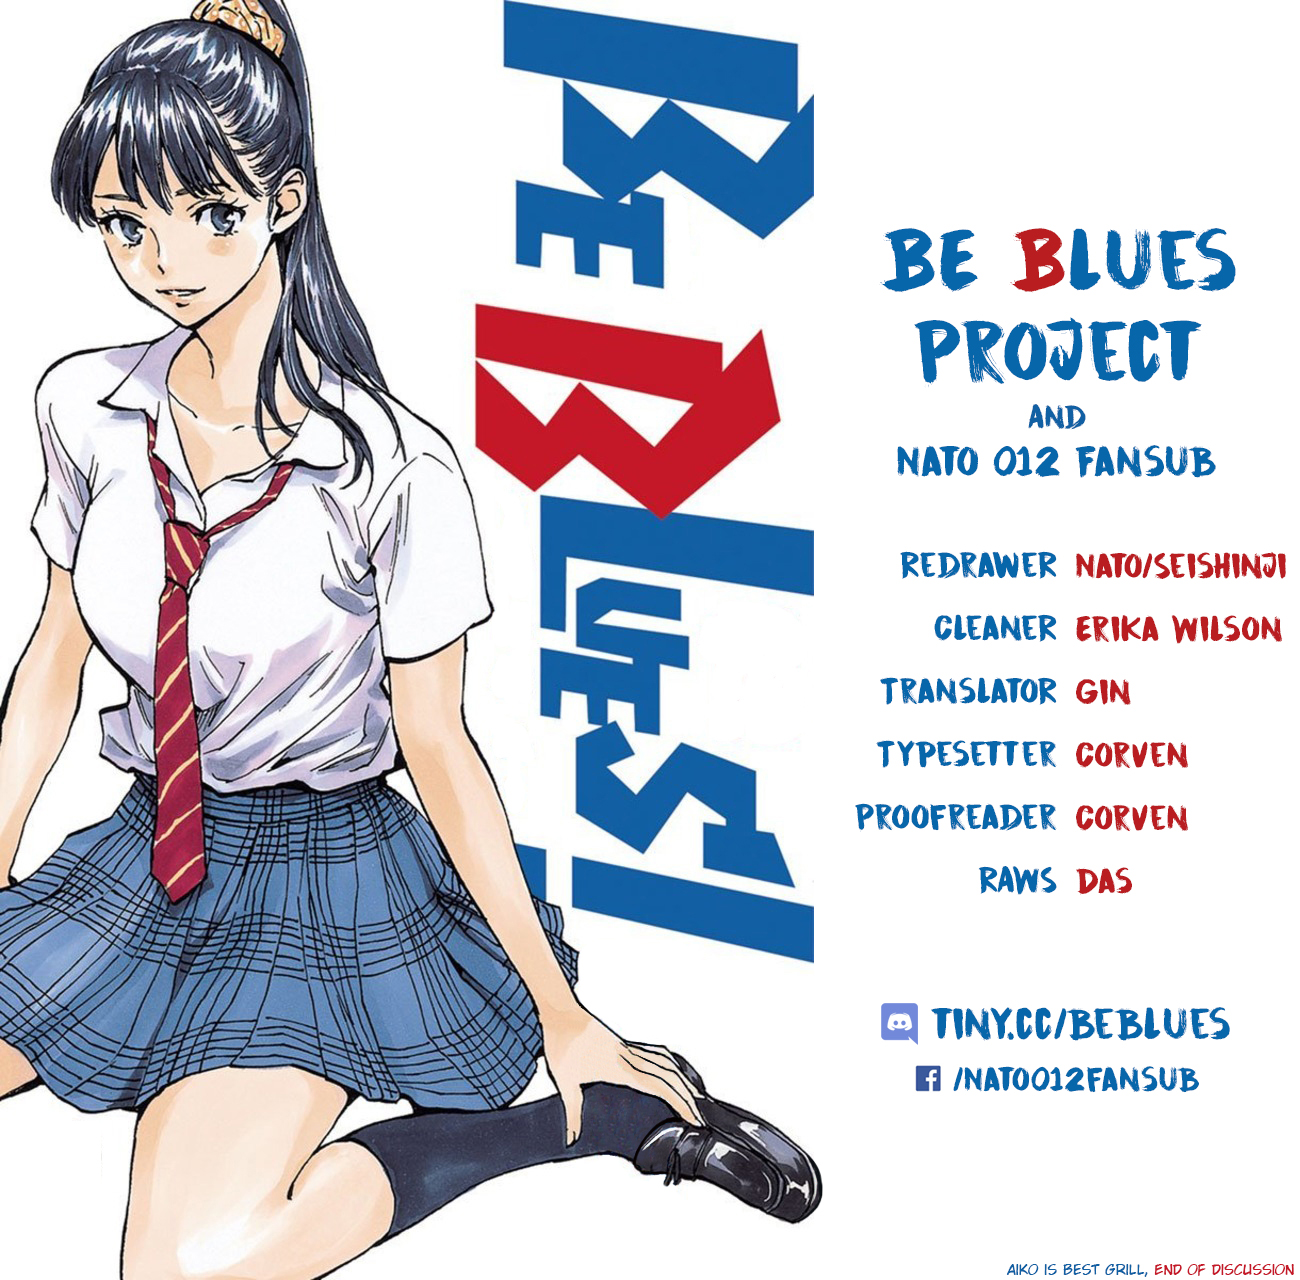 BE BLUES ~Ao ni nare~ Vol. 31 Ch. 301 The Presence of the Strong